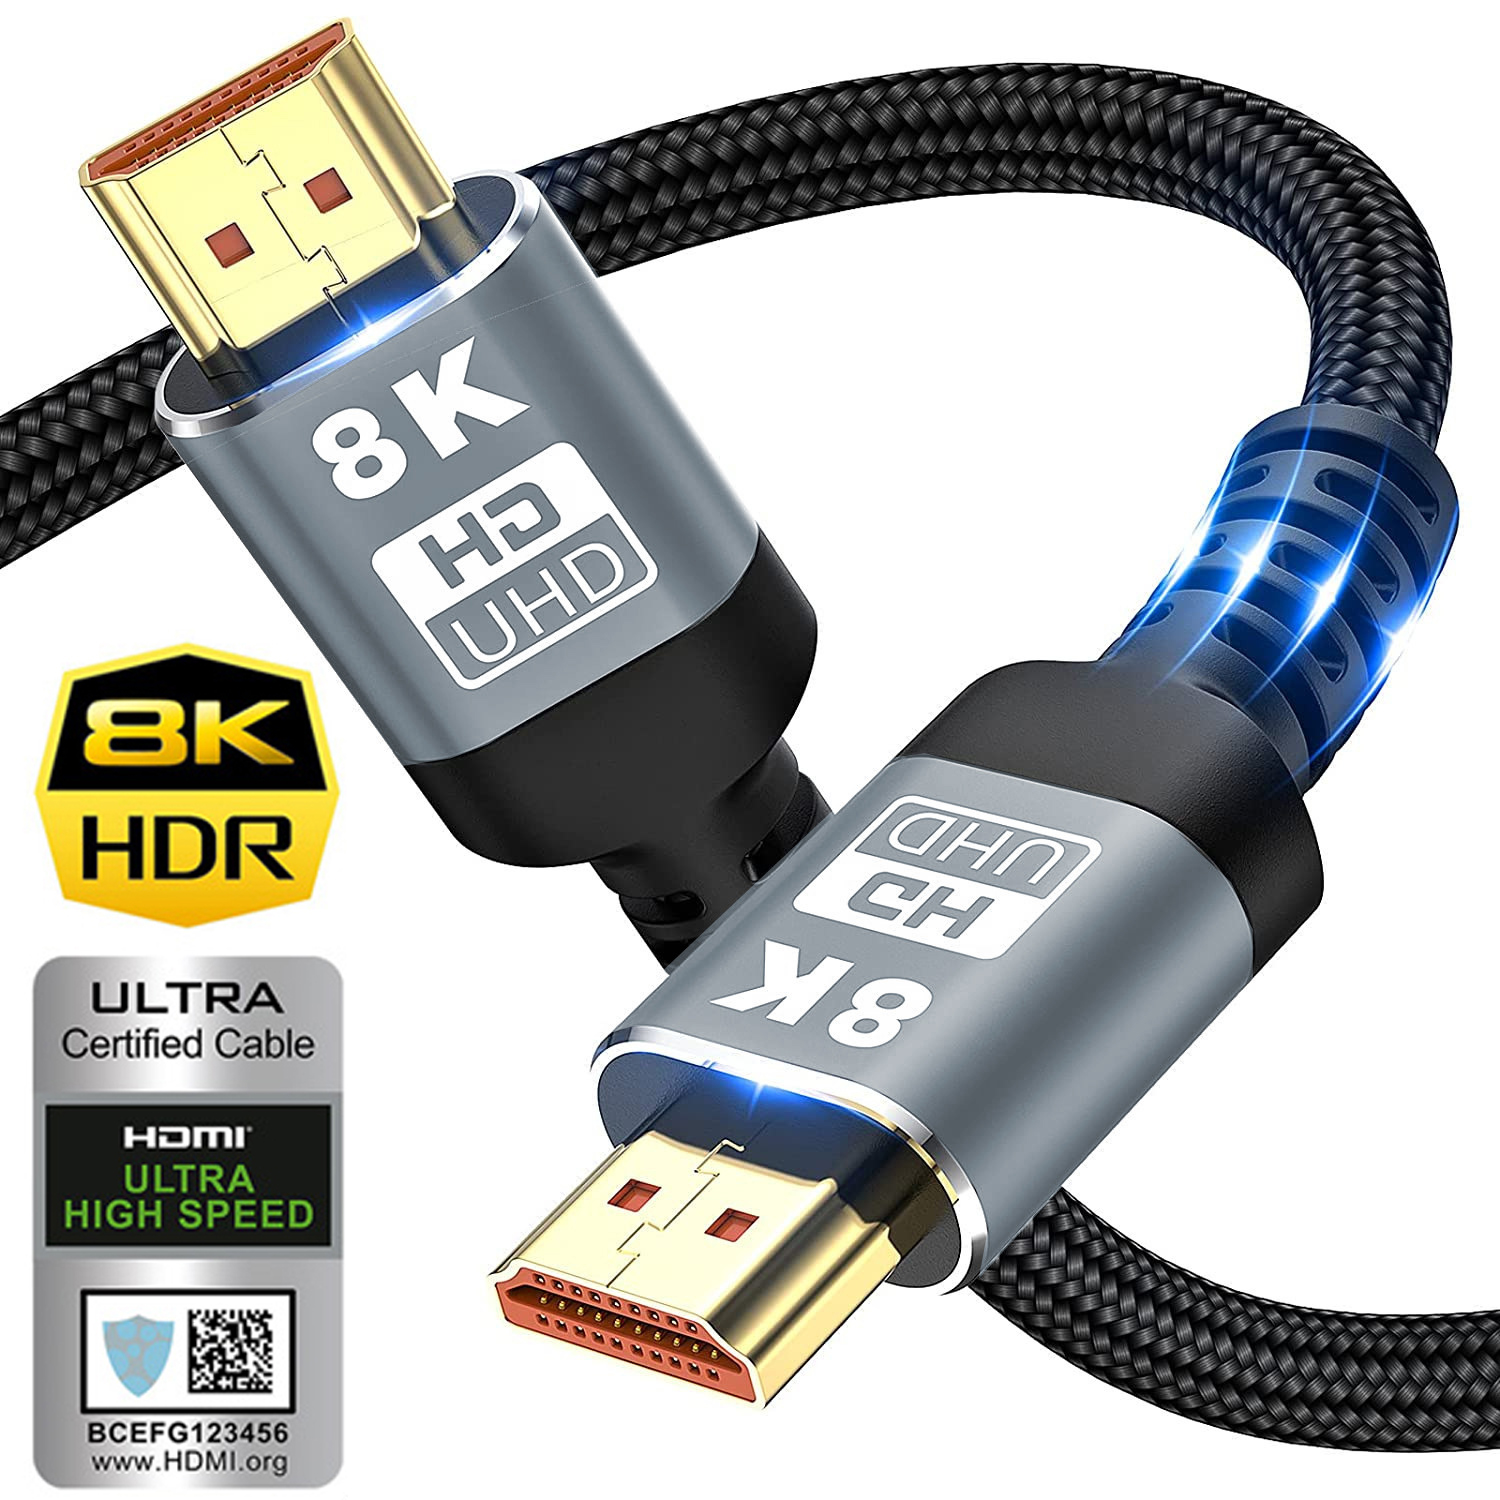 New 8K 7680×4320 Roku eARC HDR10+ HDCP 2.2&2.3 HDMI 2.1 Cable for PS5/PS4/3  USA